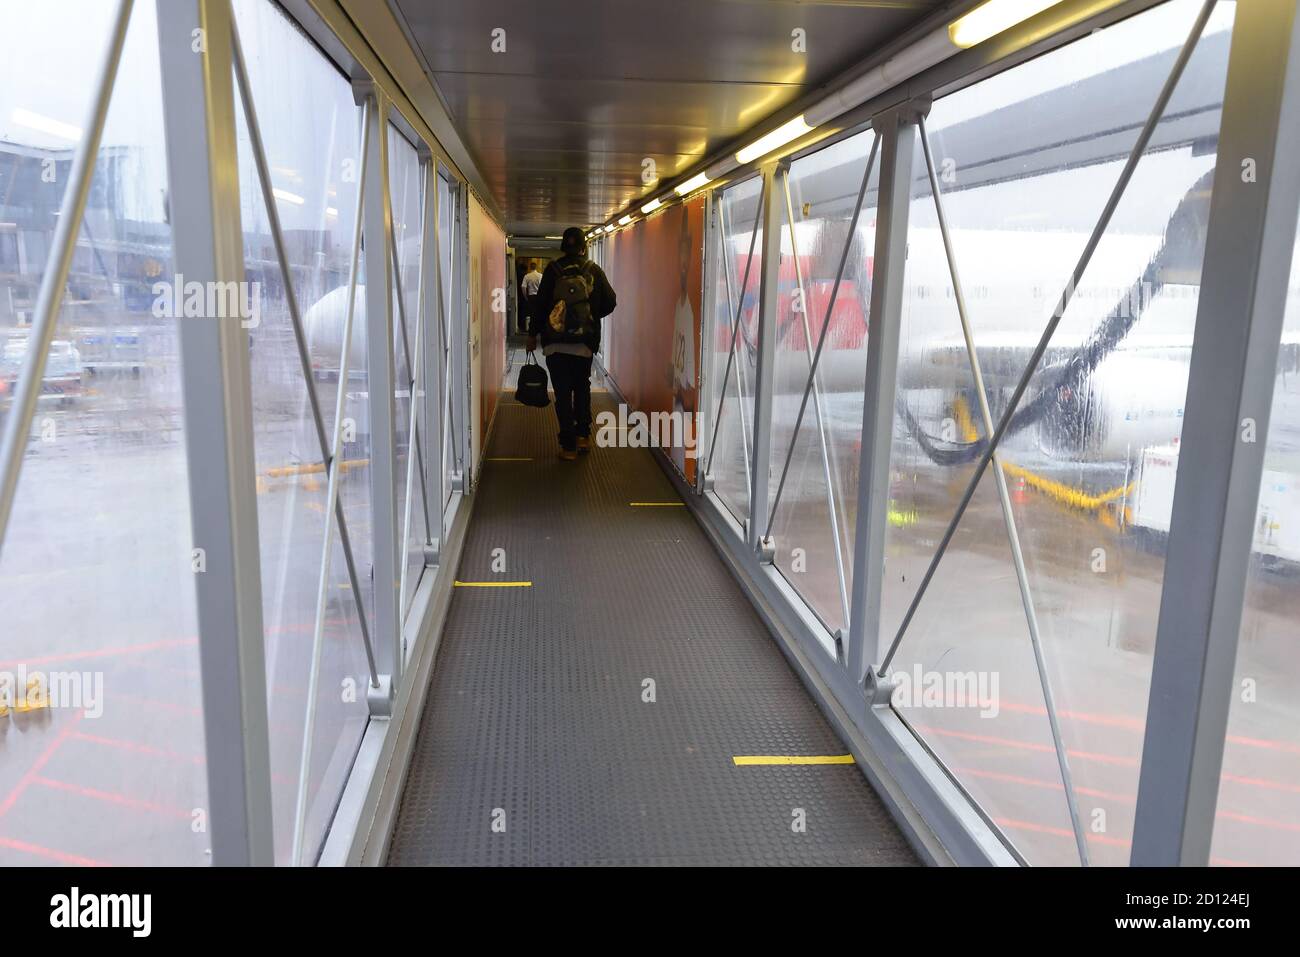 Passengers boarding bridge (jet bridge) with ground marks for social distancing due to Coronavirus / Covid 19 pandemic. Jetway with ground markers. Stock Photo